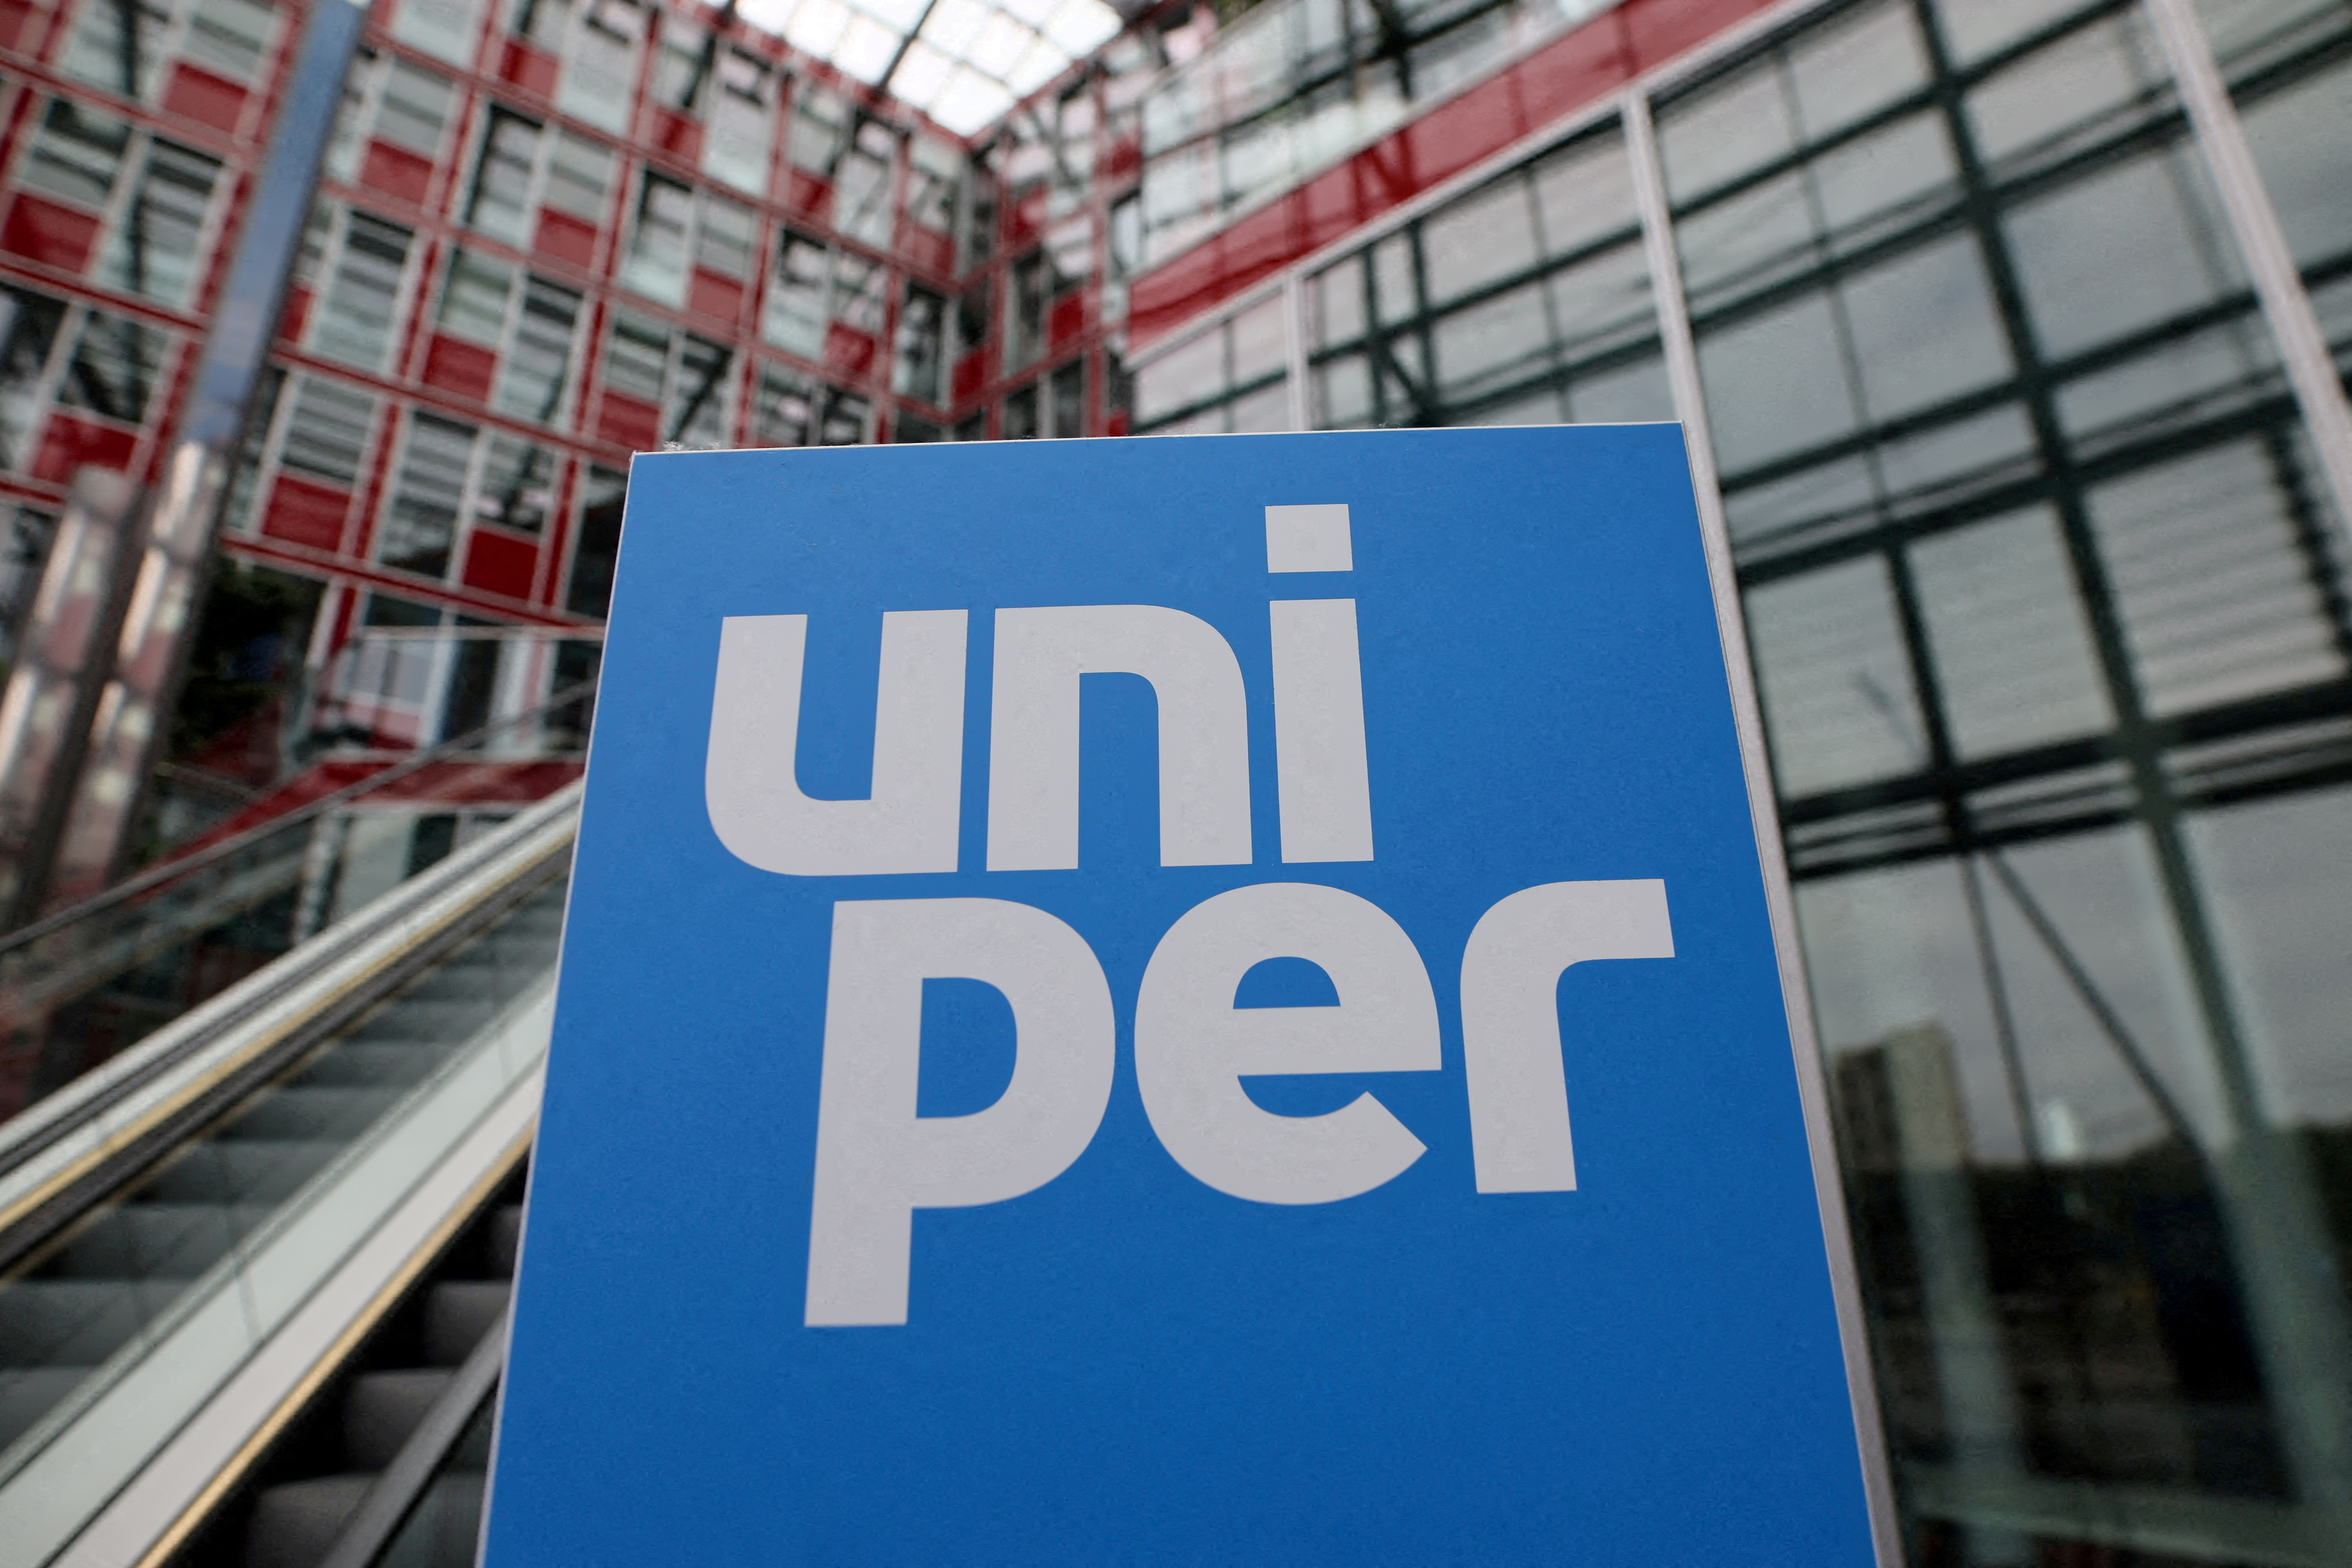 The Uniper logo is seen in front of the utility's firm headquarters in Duesseldorf